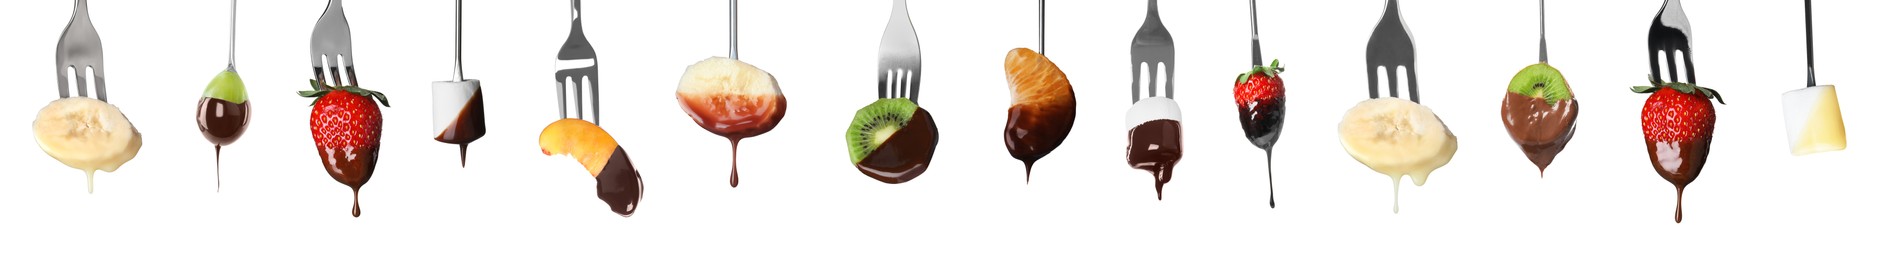 Fondue forks with tasty fruits and marshmallows dipped into chocolate on white background, collage. Banner design